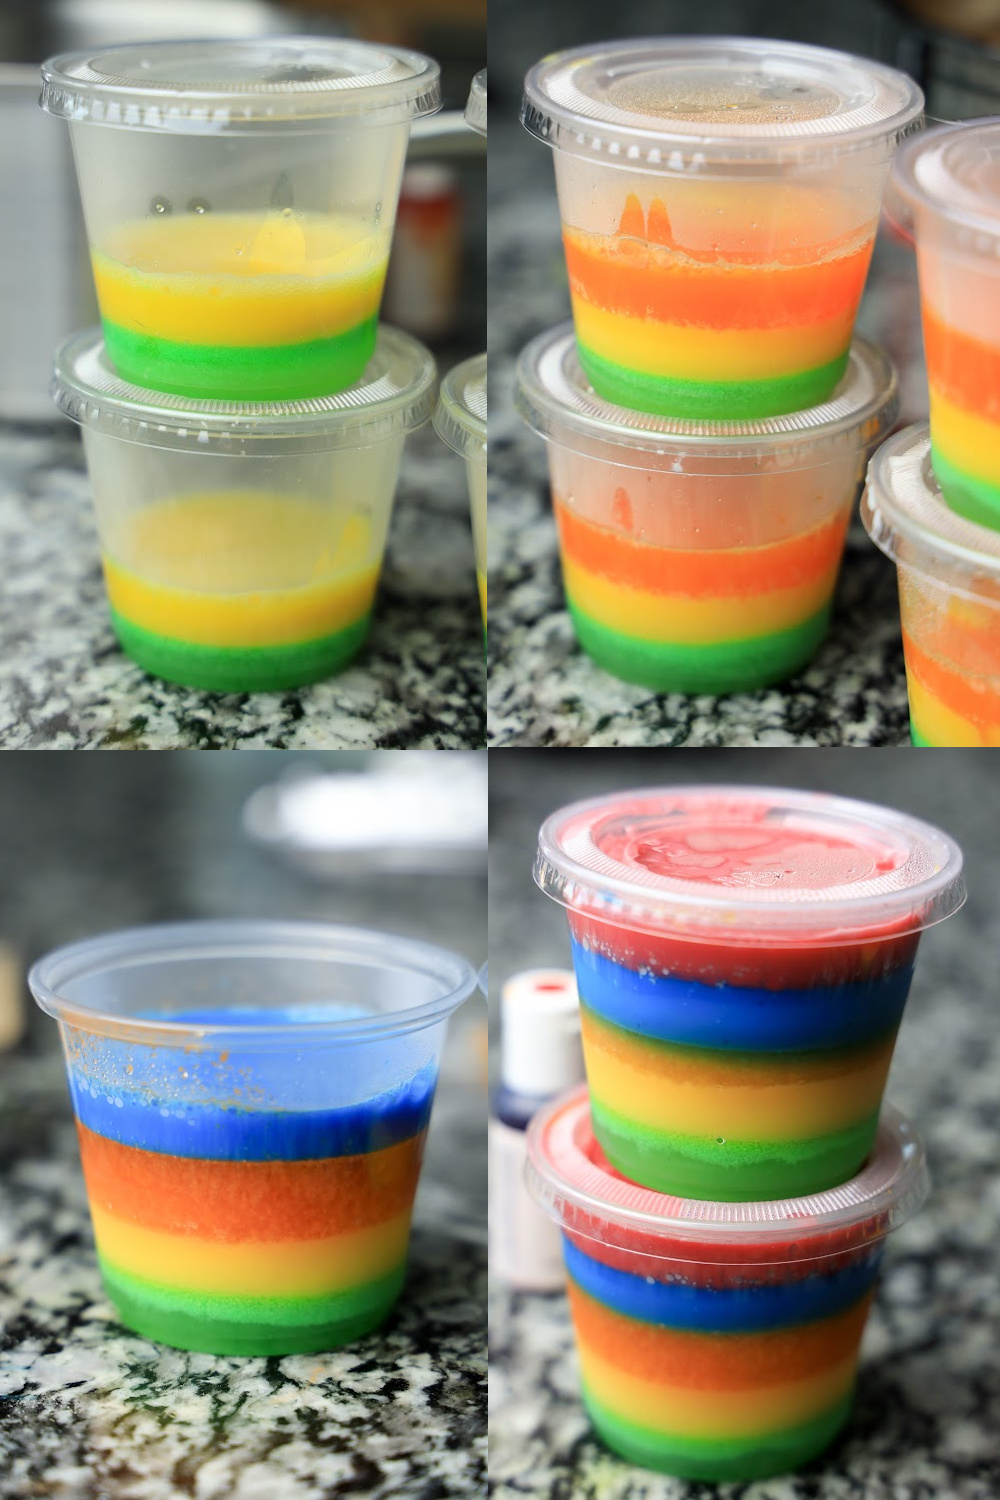 How to make rainbow jello shots step by step for each layer.